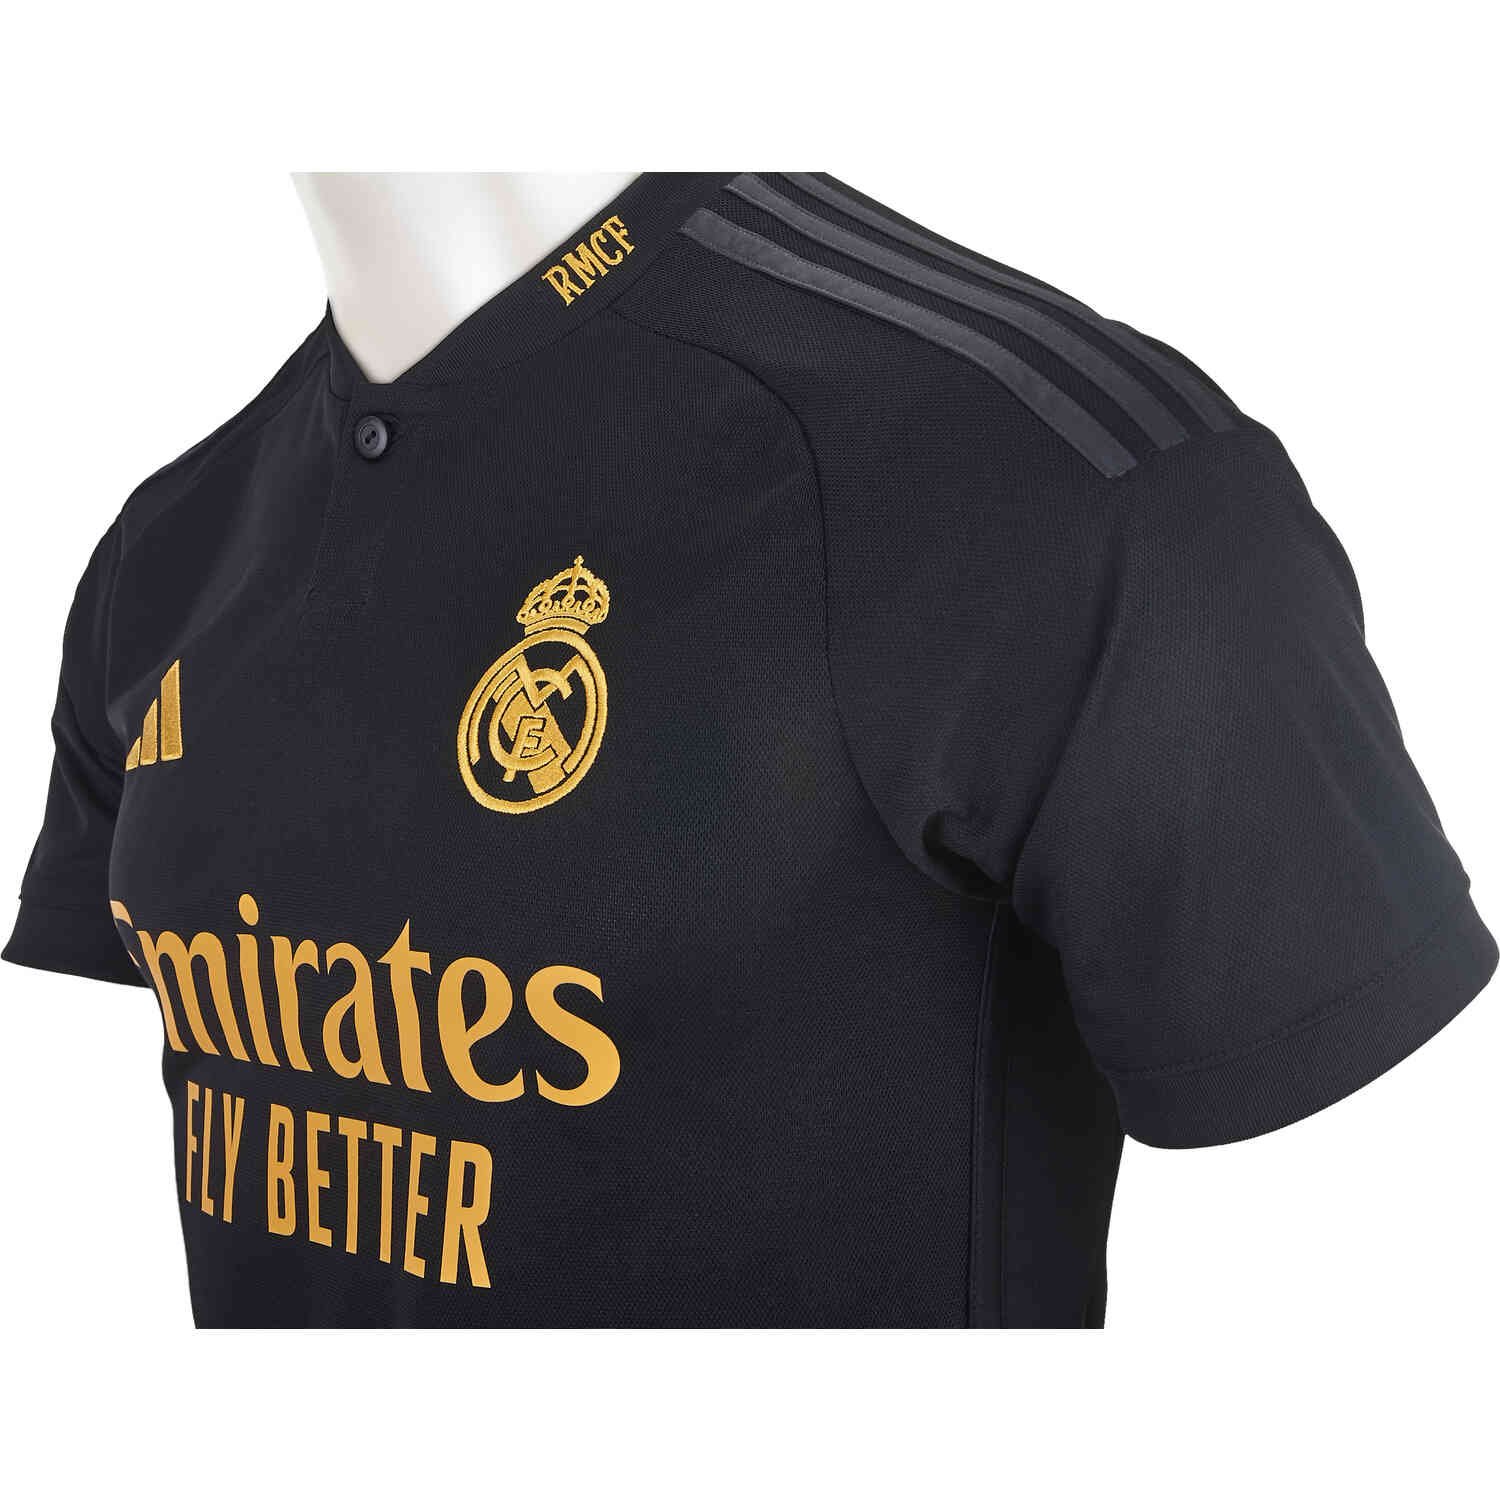 Real Madrid 23/24 adidas third jersey - Black/Yellow - IN9846